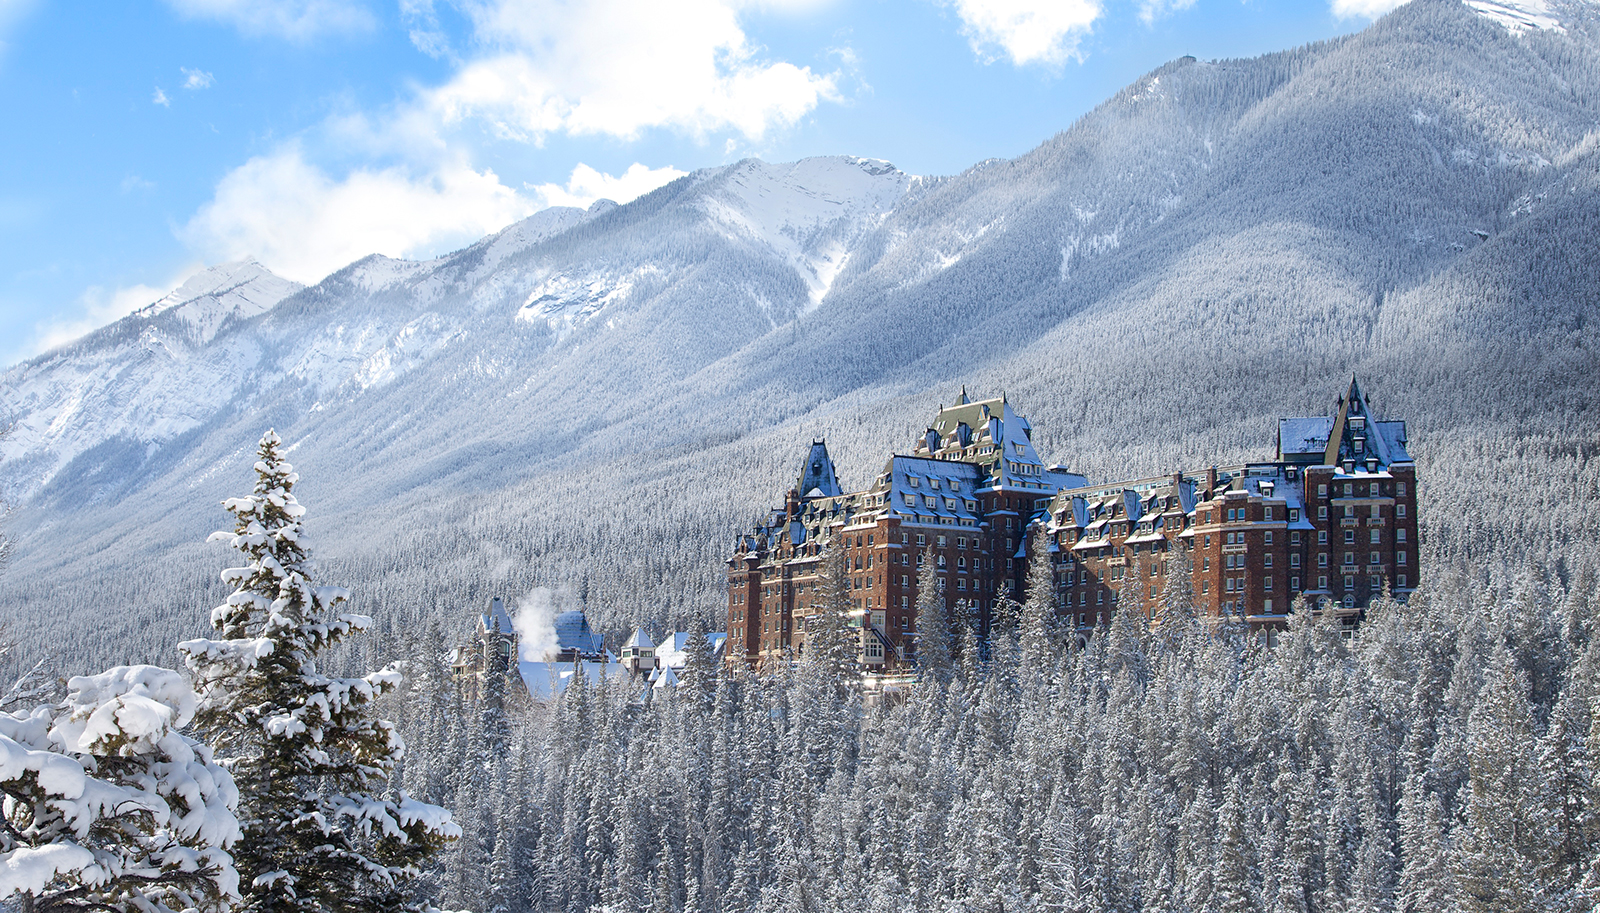 The 125 year old Banff Springs Hotel in Canada.